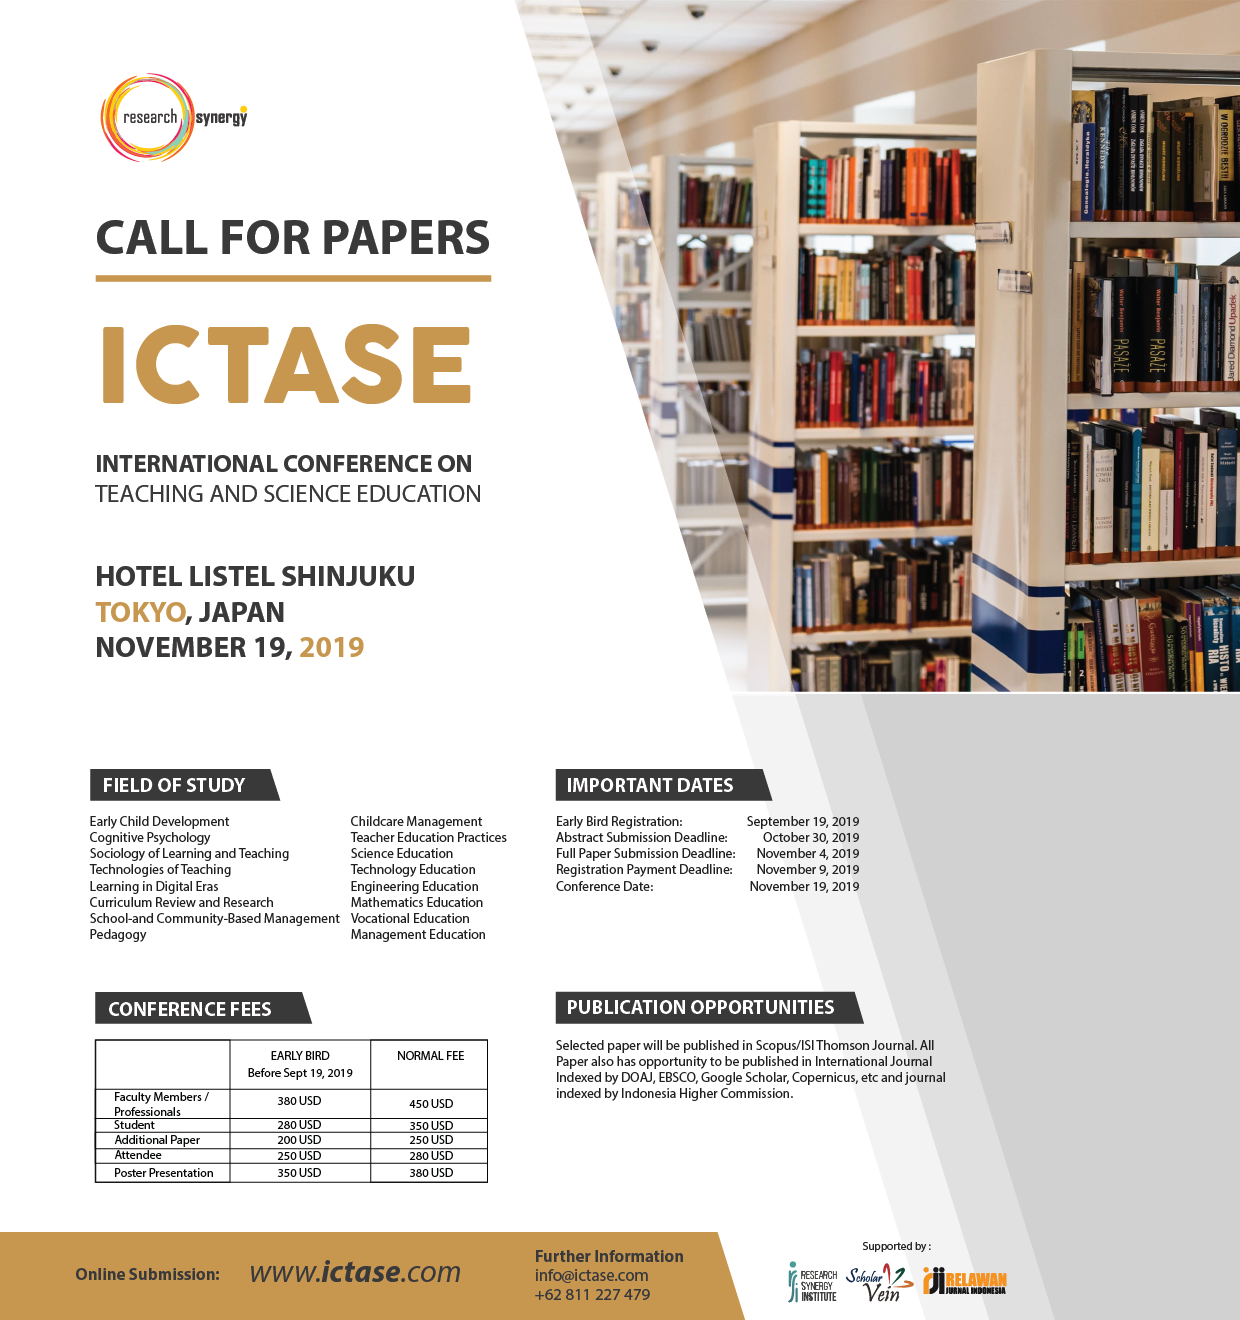 International Conference on Teaching and Science Education (ICTASE)